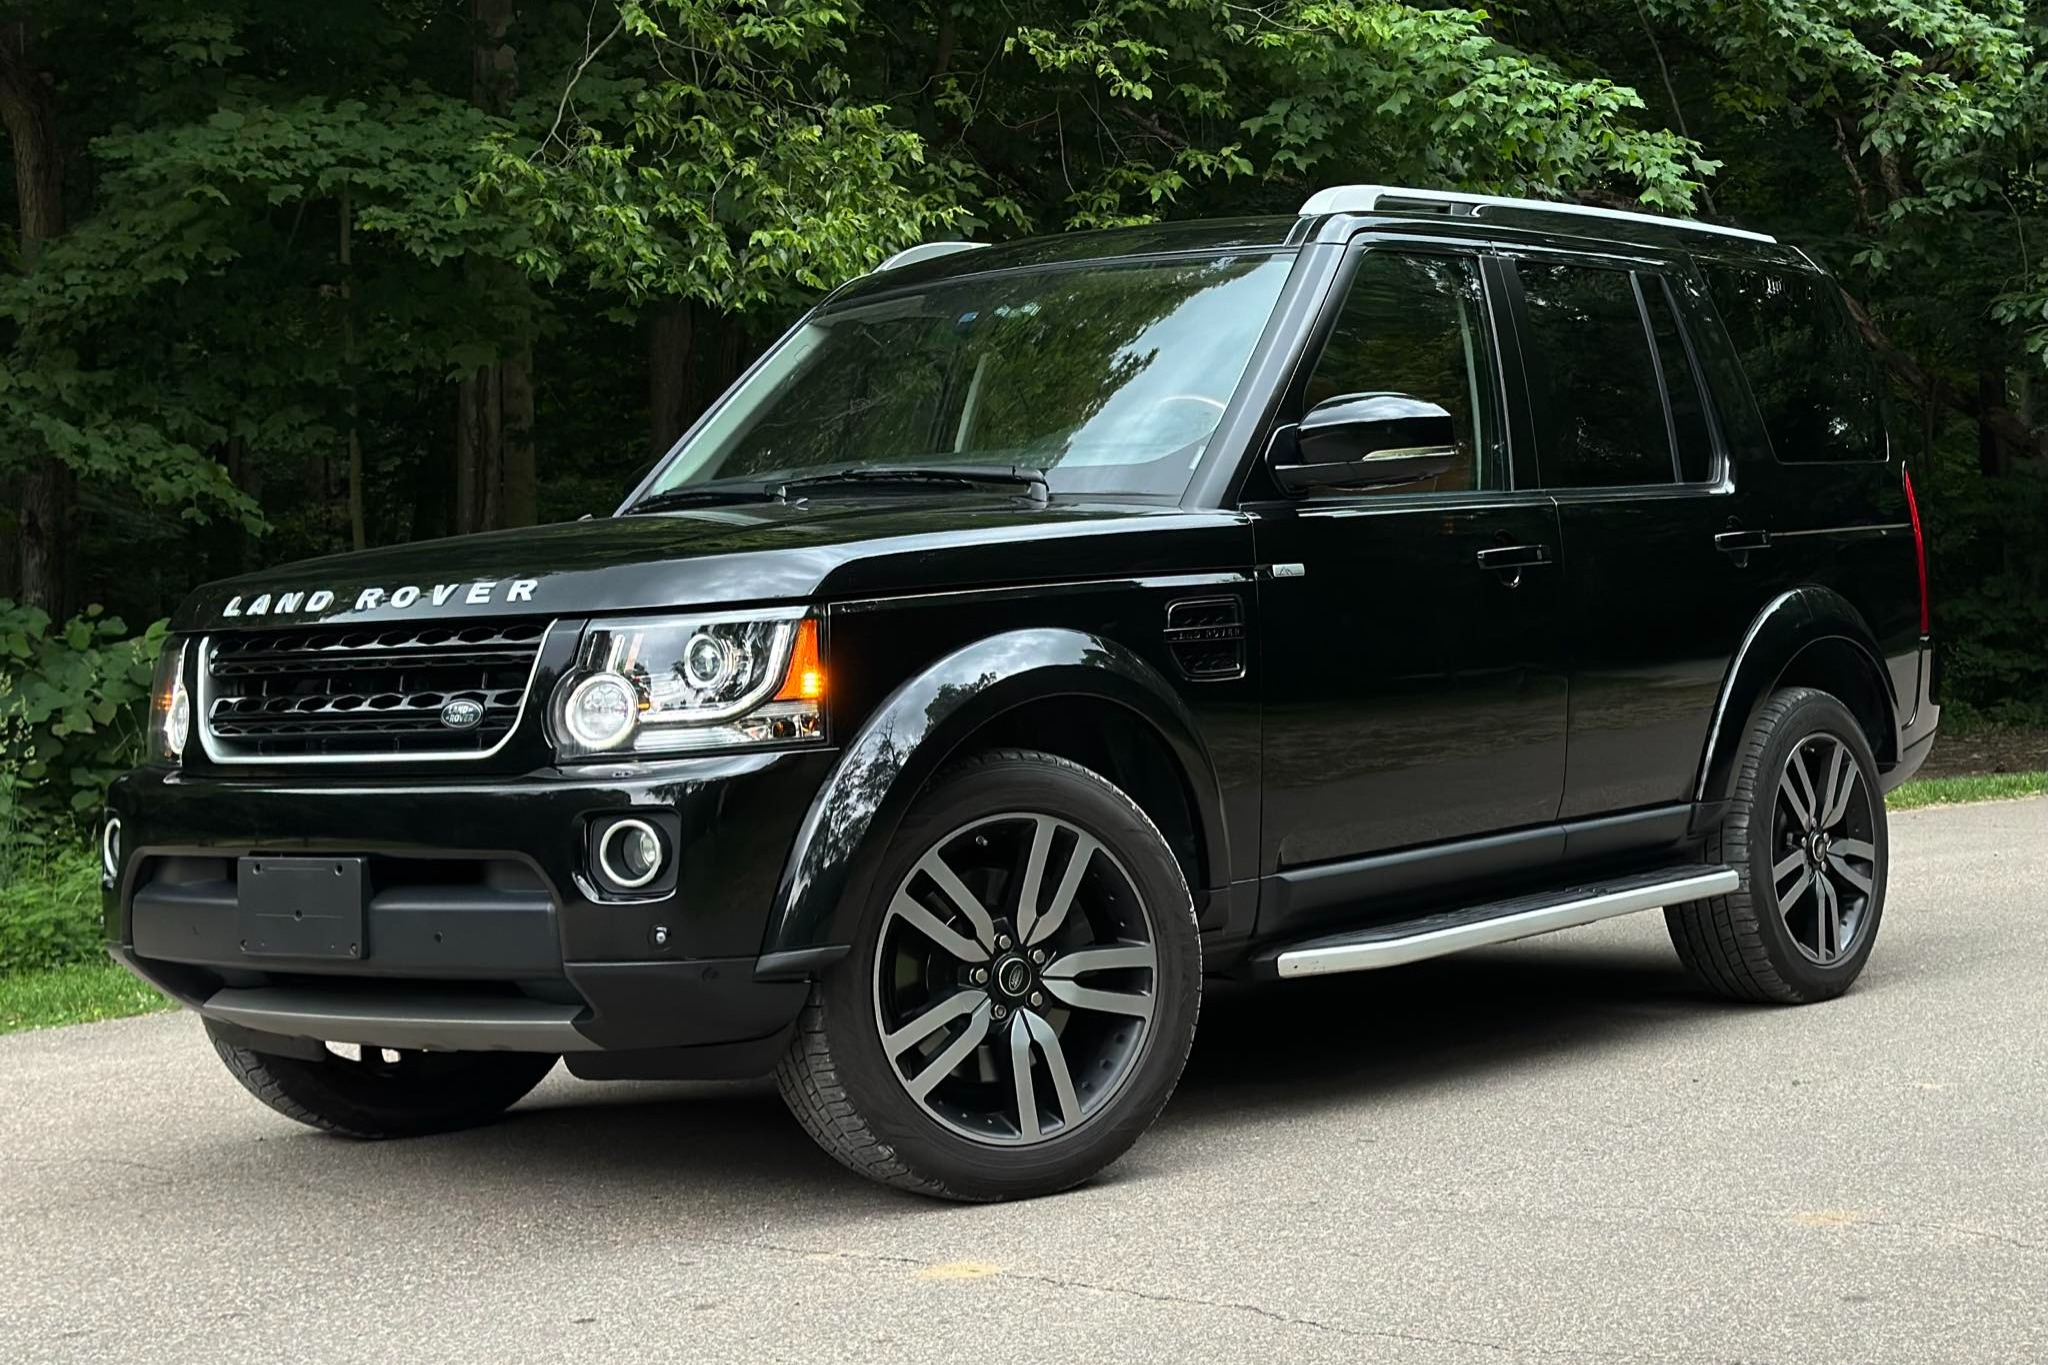 Used 2016 Land Rover LR4 Landmark Edition Review